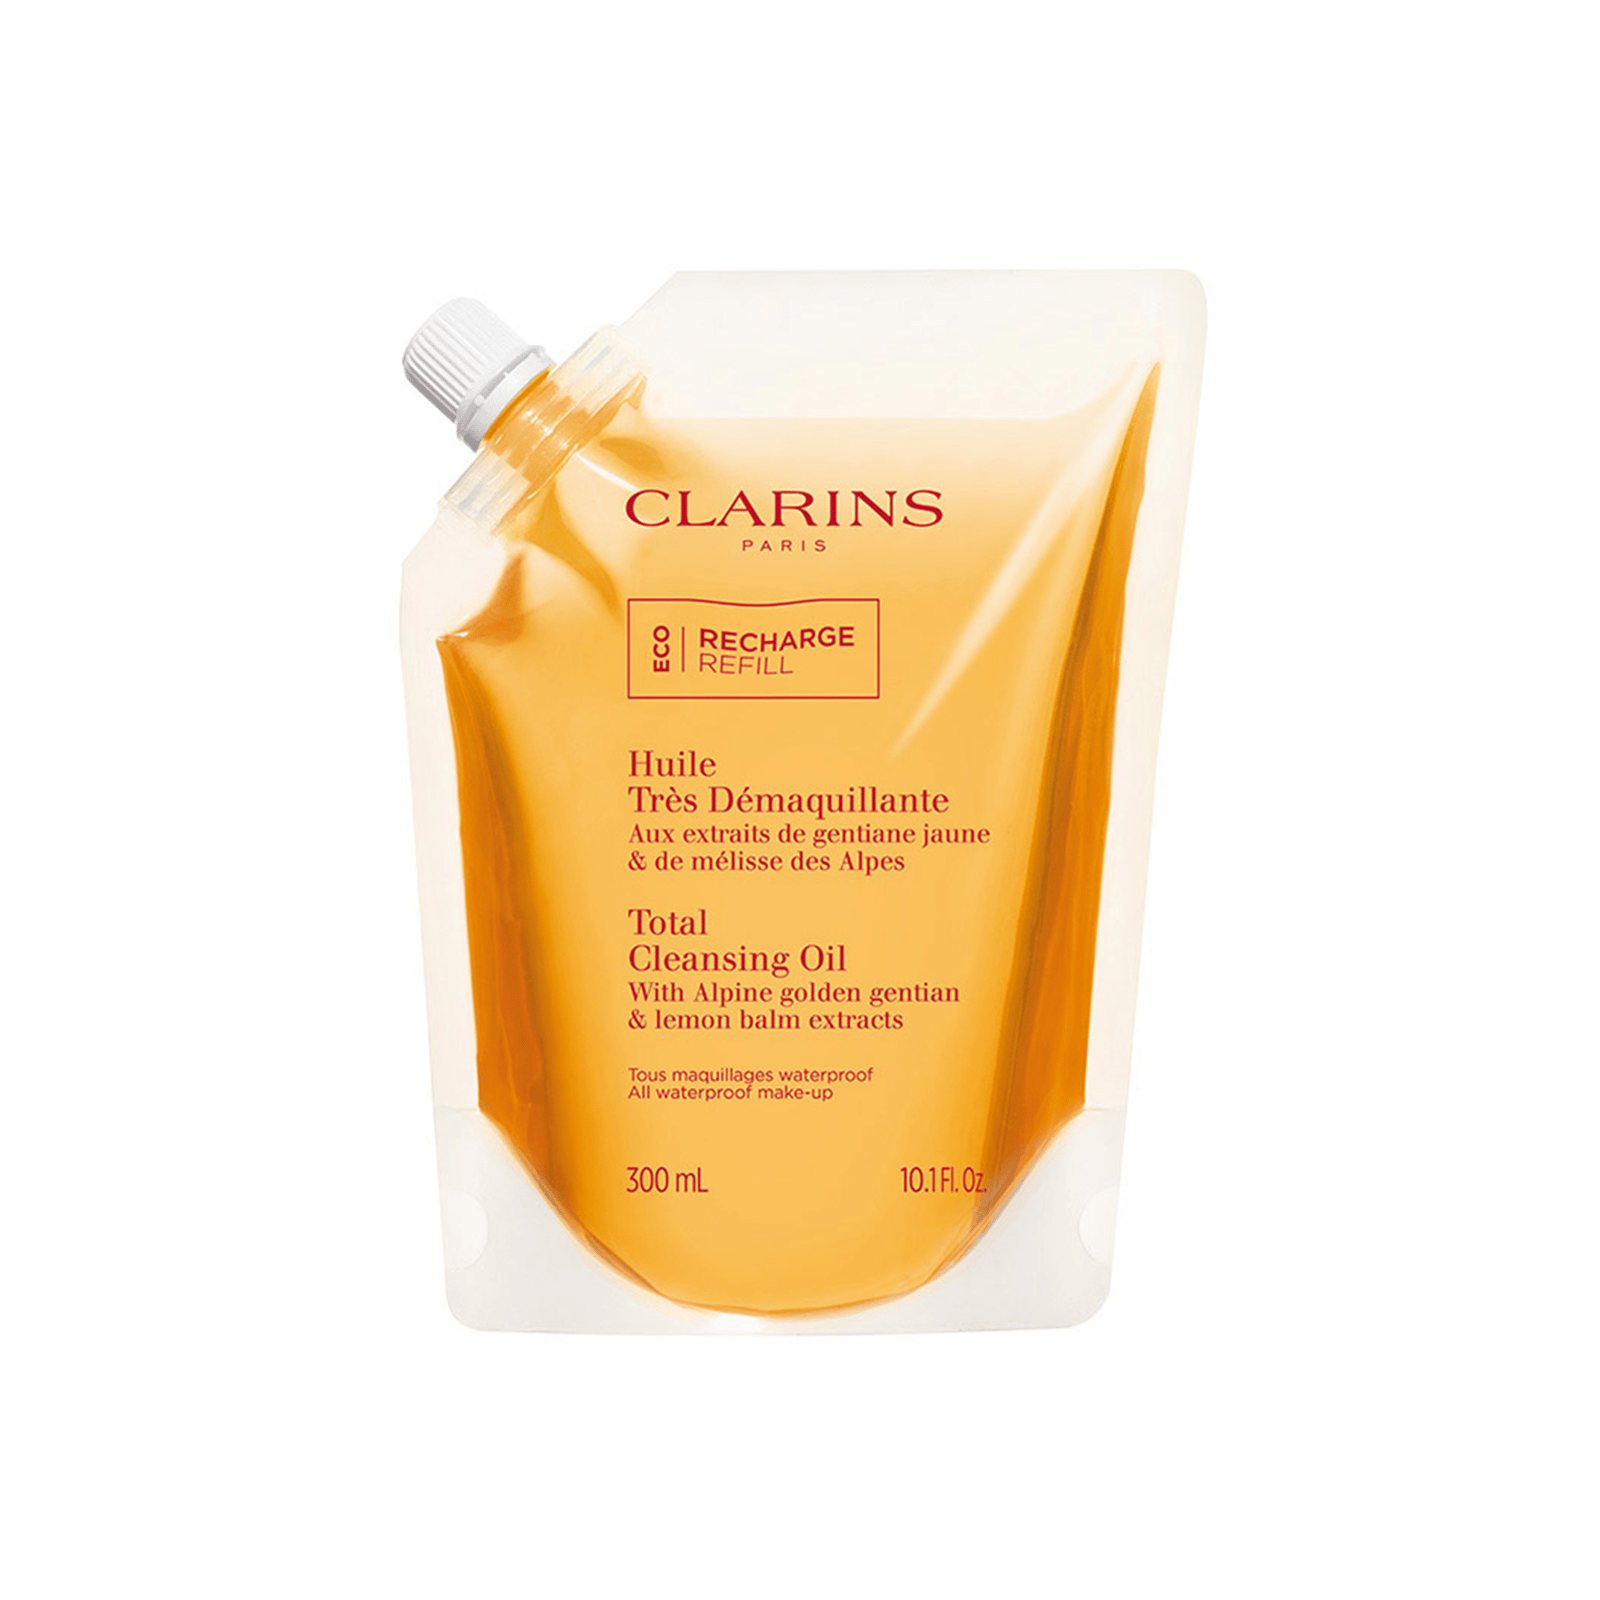 Clarins Total Cleansing Oil Eco-Refill 300ml (10.1floz)